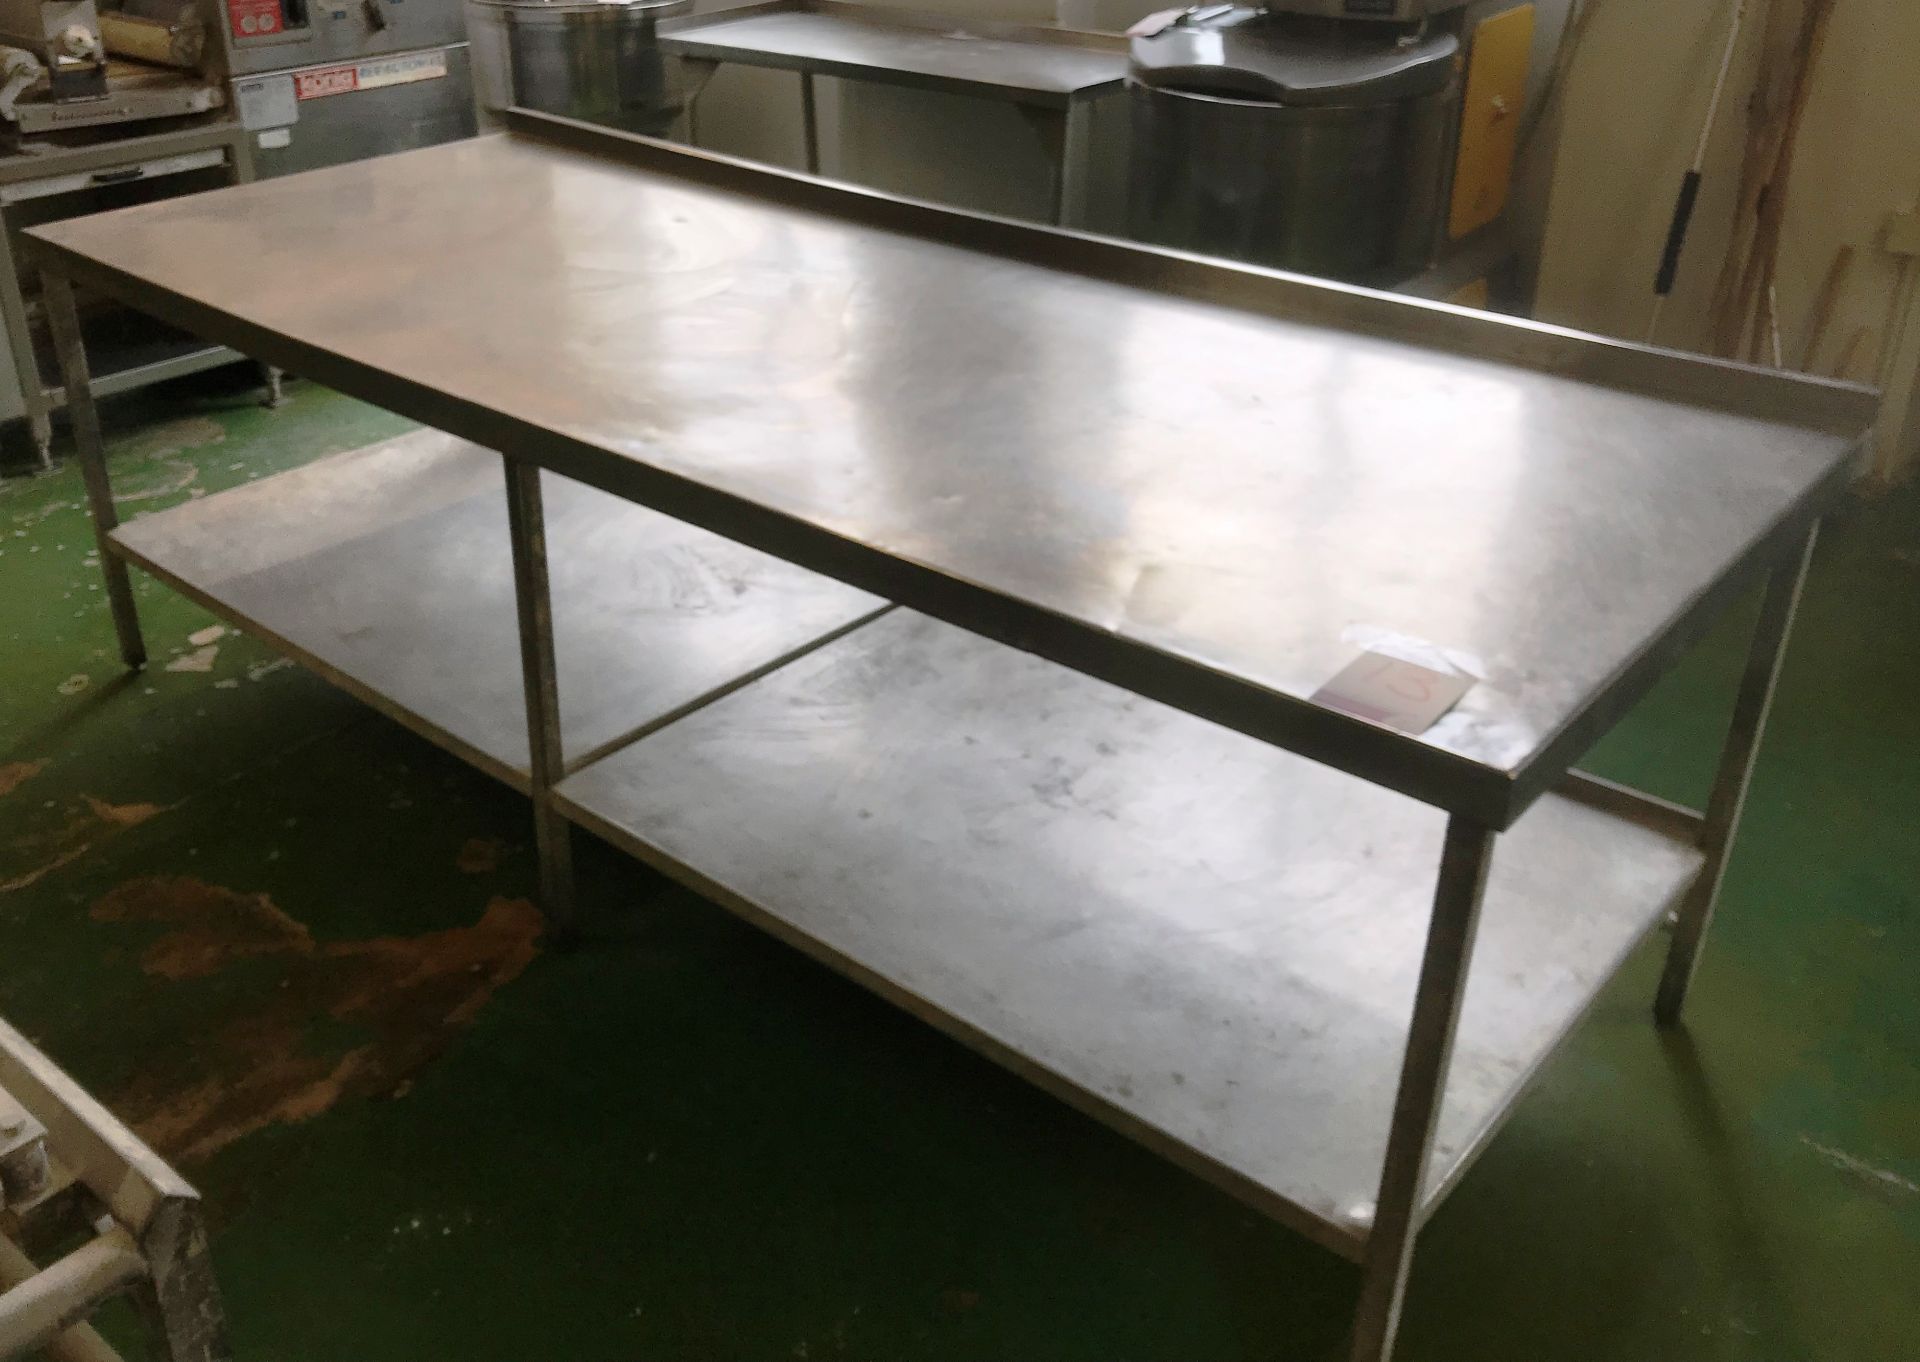 Stainless Steel Preparation Table w/ Up-stand - 275cm L x 109cm D x 89cm H